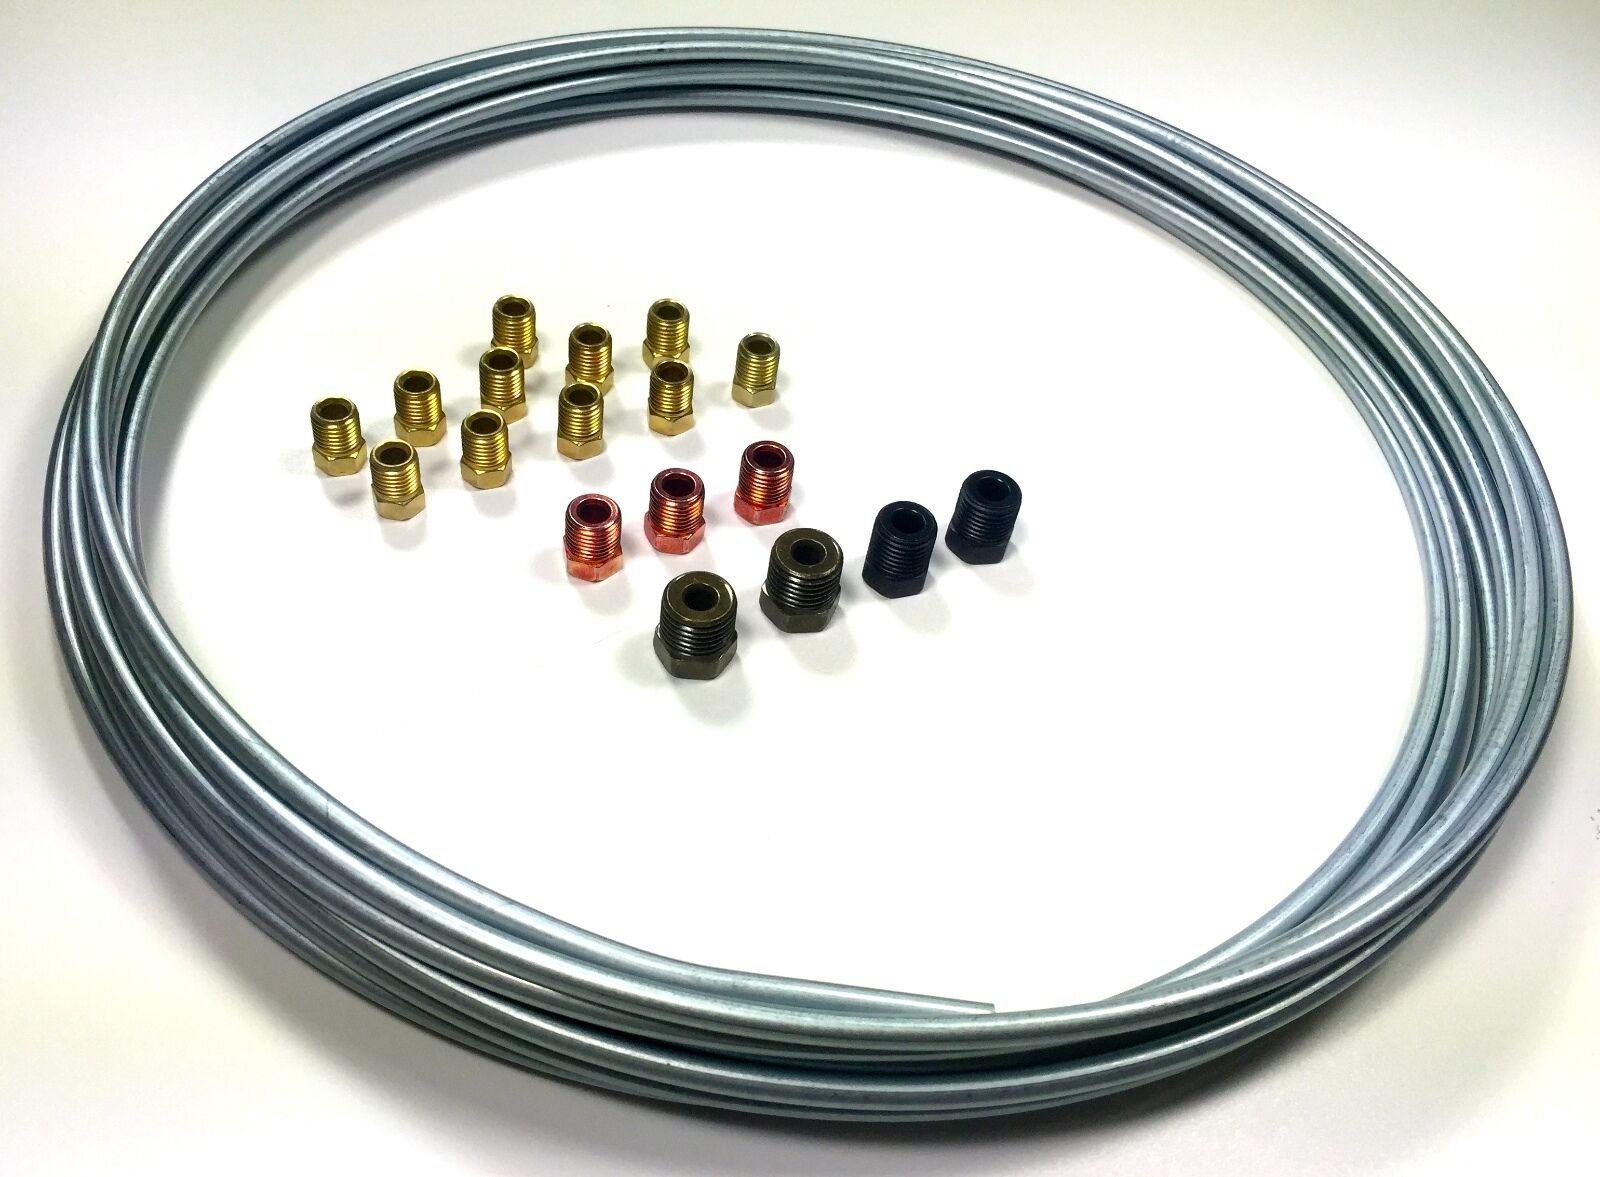 3/16 Brake Line Kit - 25 Ft. With Most Common SAE Fittings